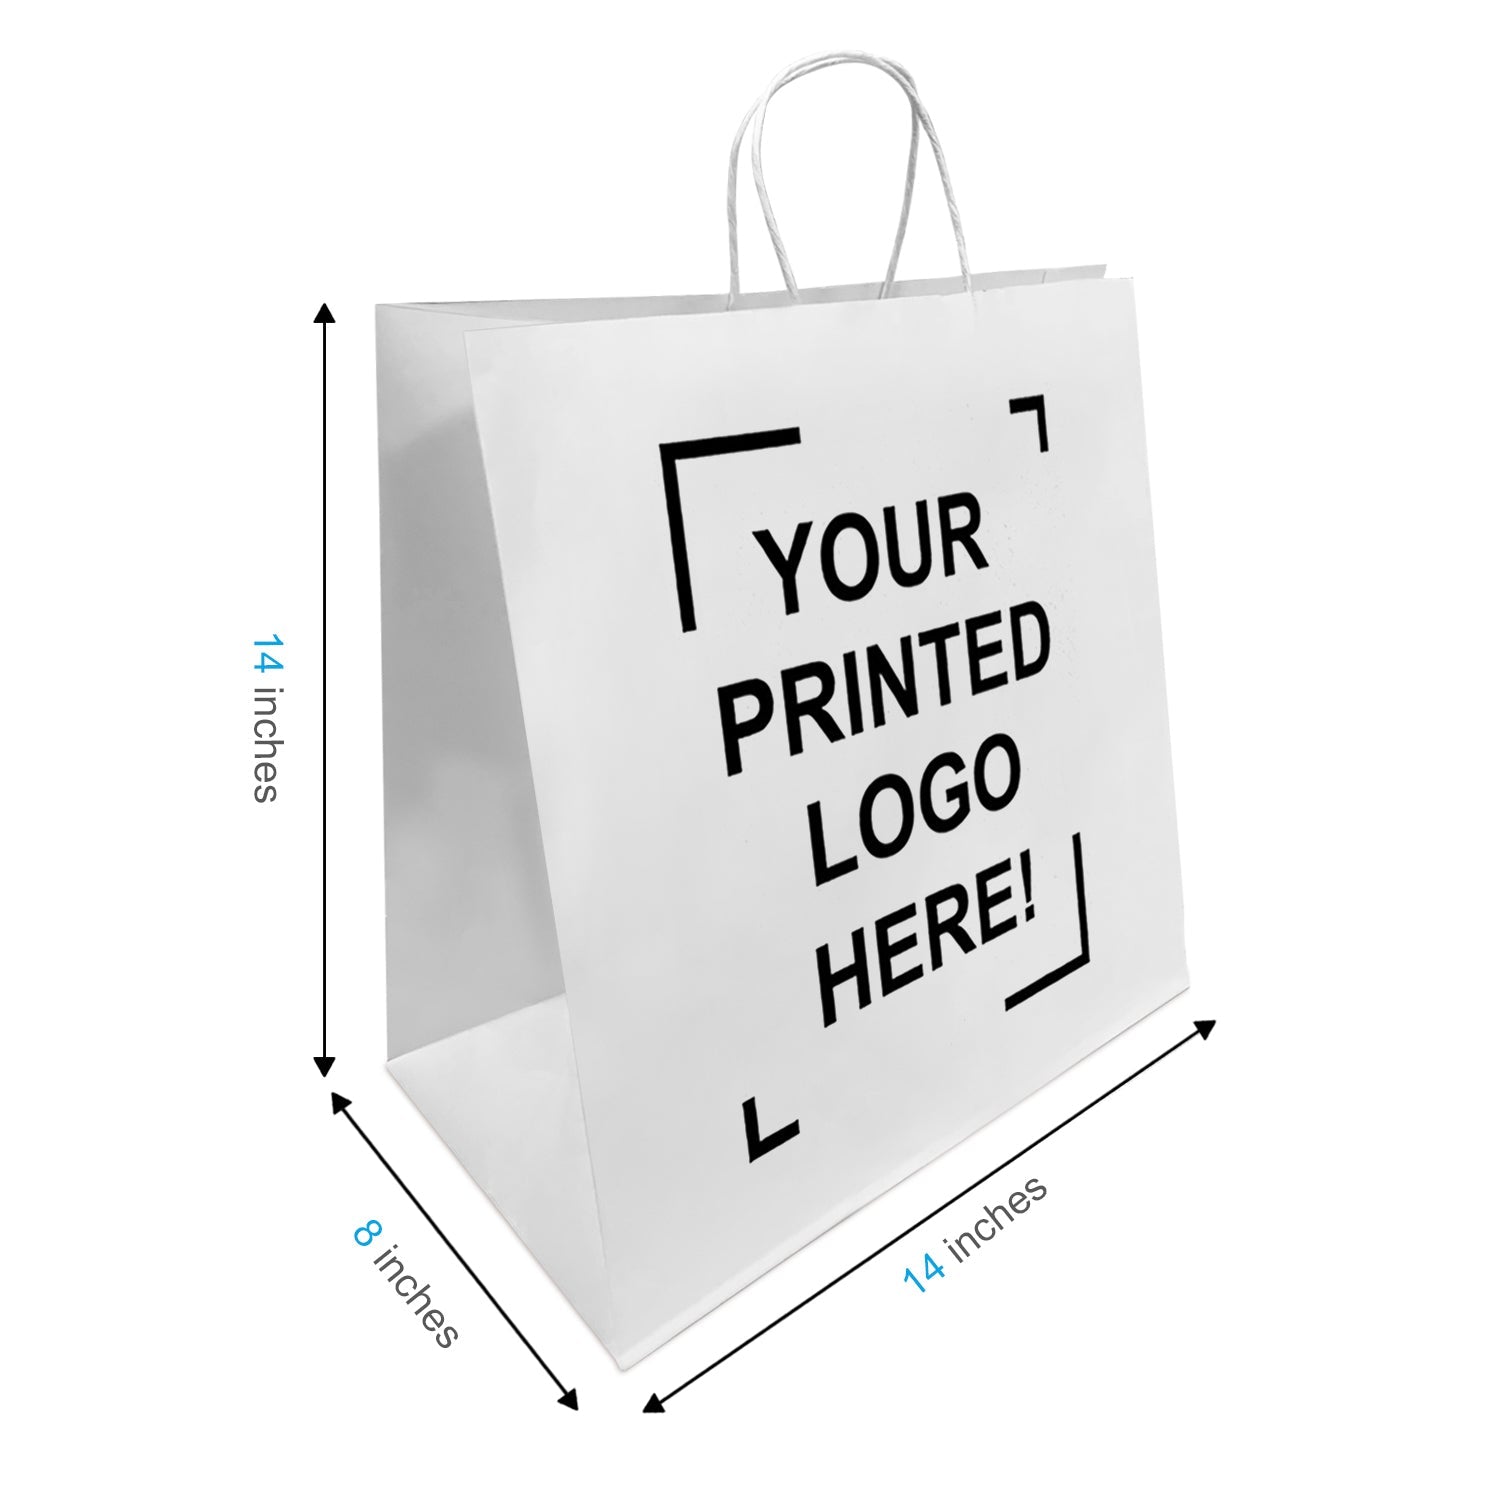 200 Pcs, Tiger, 14x8x14 inches, White Paper Bags, with Twisted Handle, Full Color Custom Print